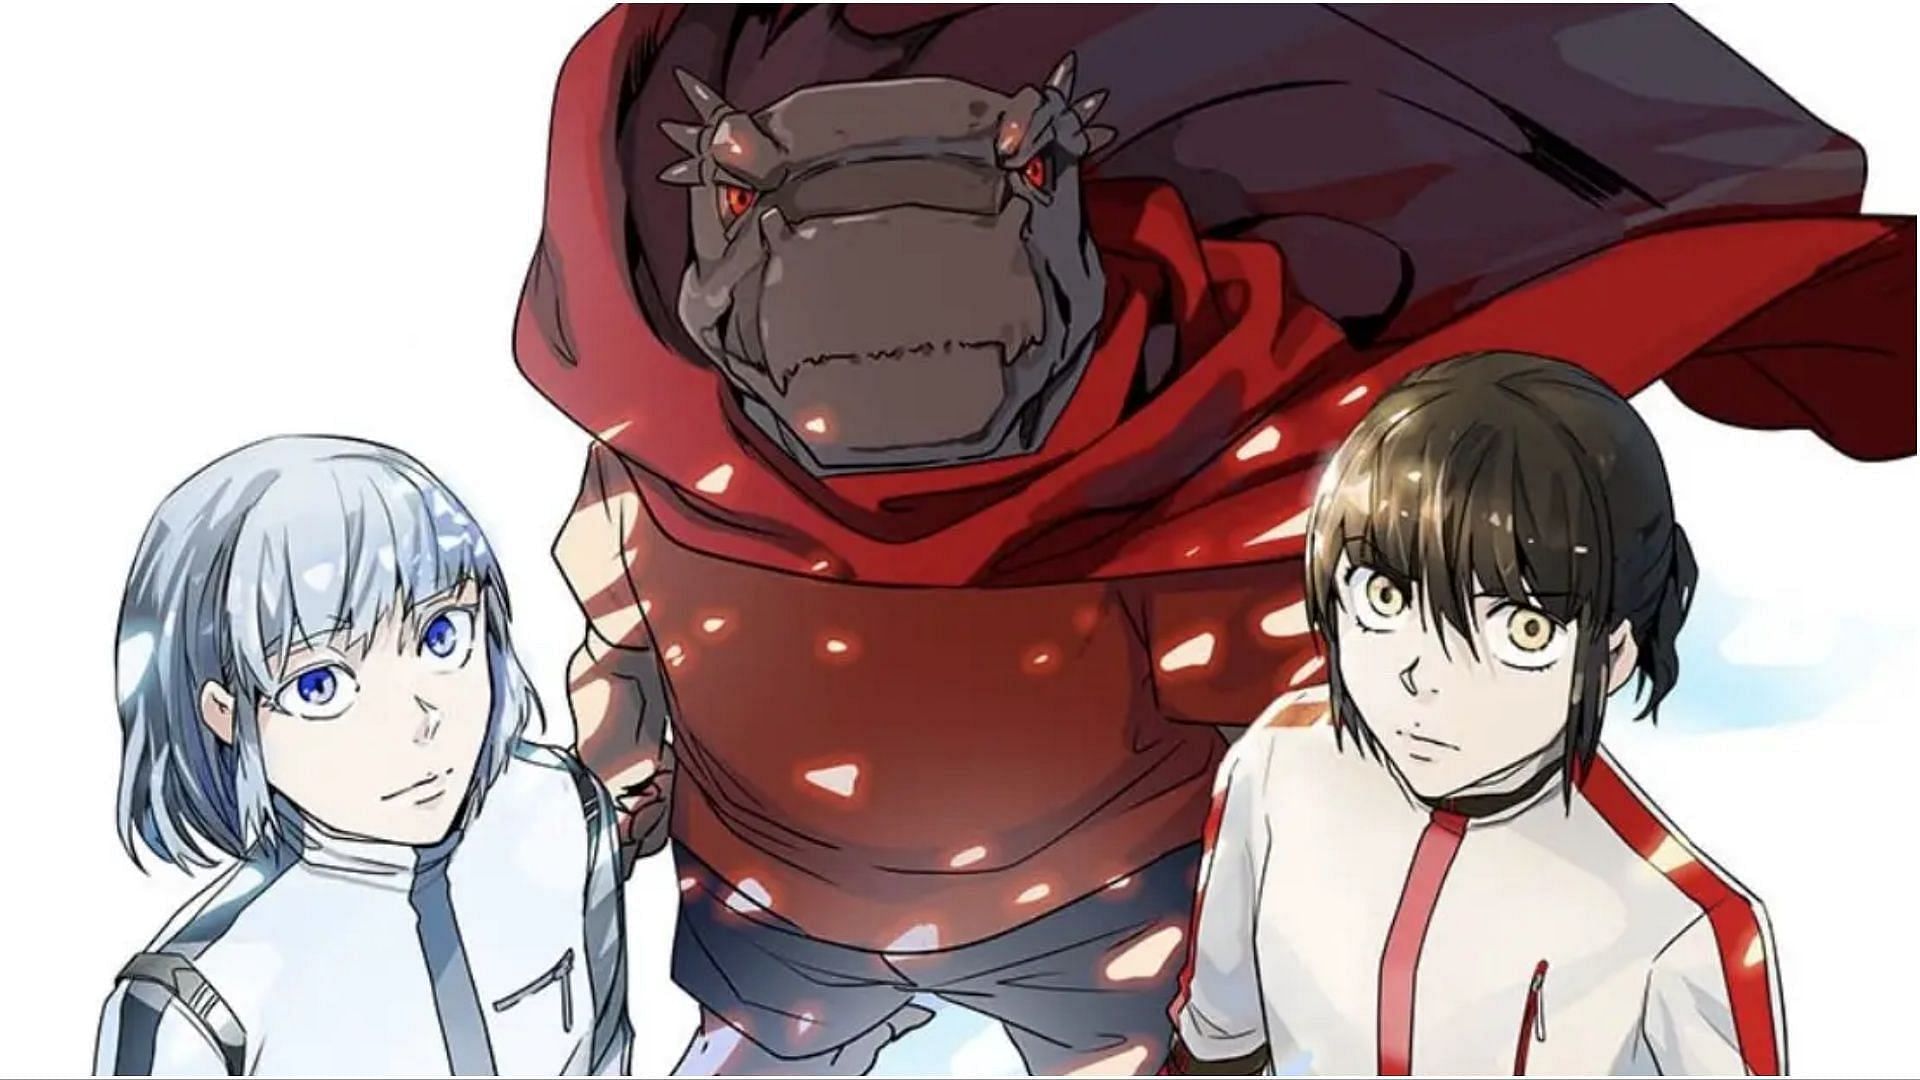 Tower of God season 2 announces July 2024 release date via new trailer